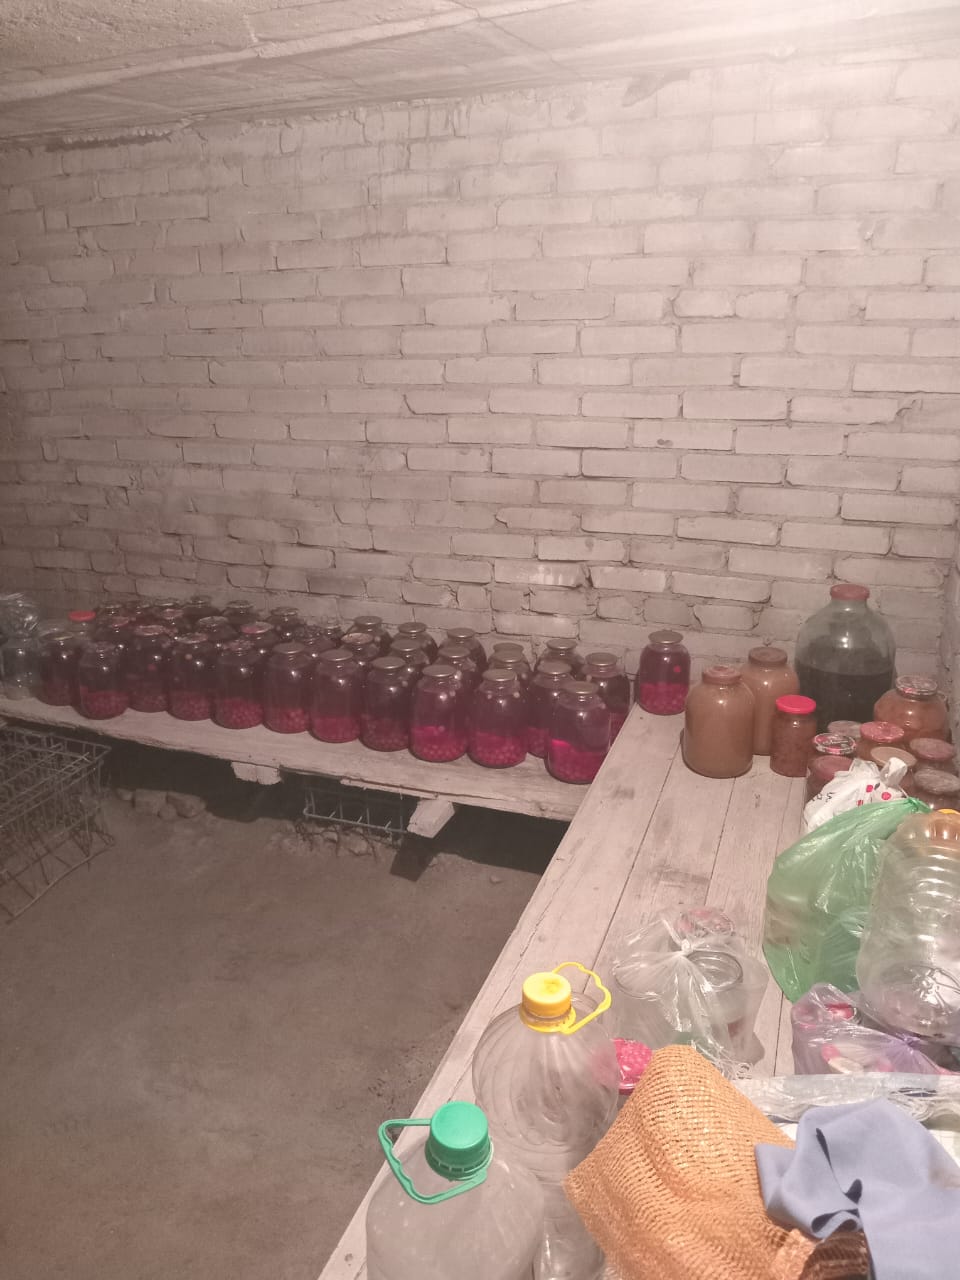 about 30 jars with cherries and red kompot (fruit juice drink) inside on a wooden table in a cellar with brick walls